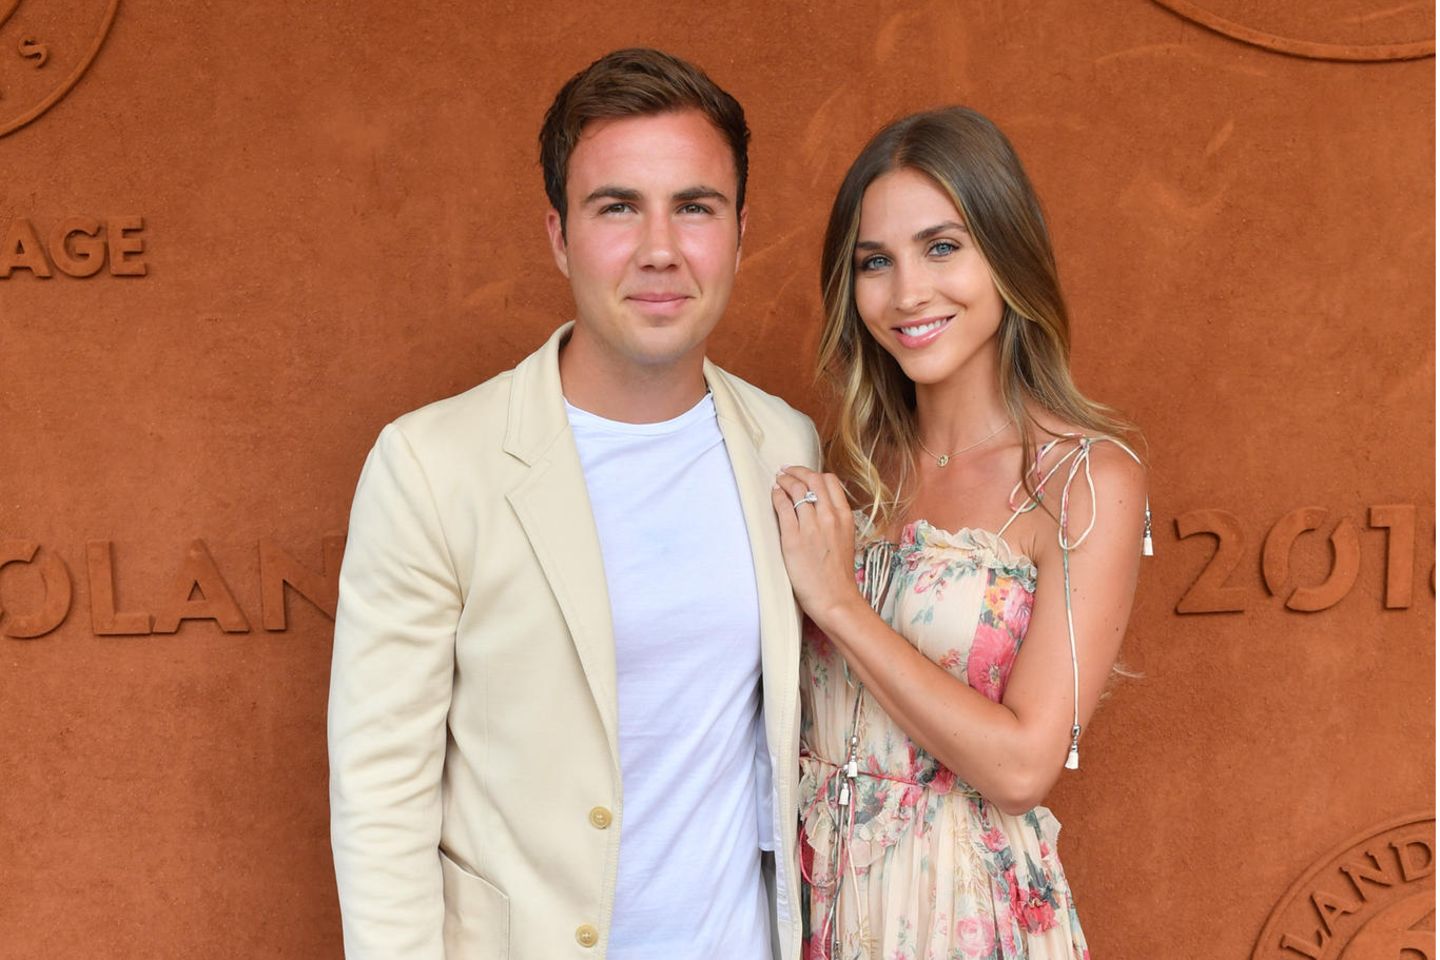 Ann-Kathrin + Mario Götze: The couple in front of a brown background